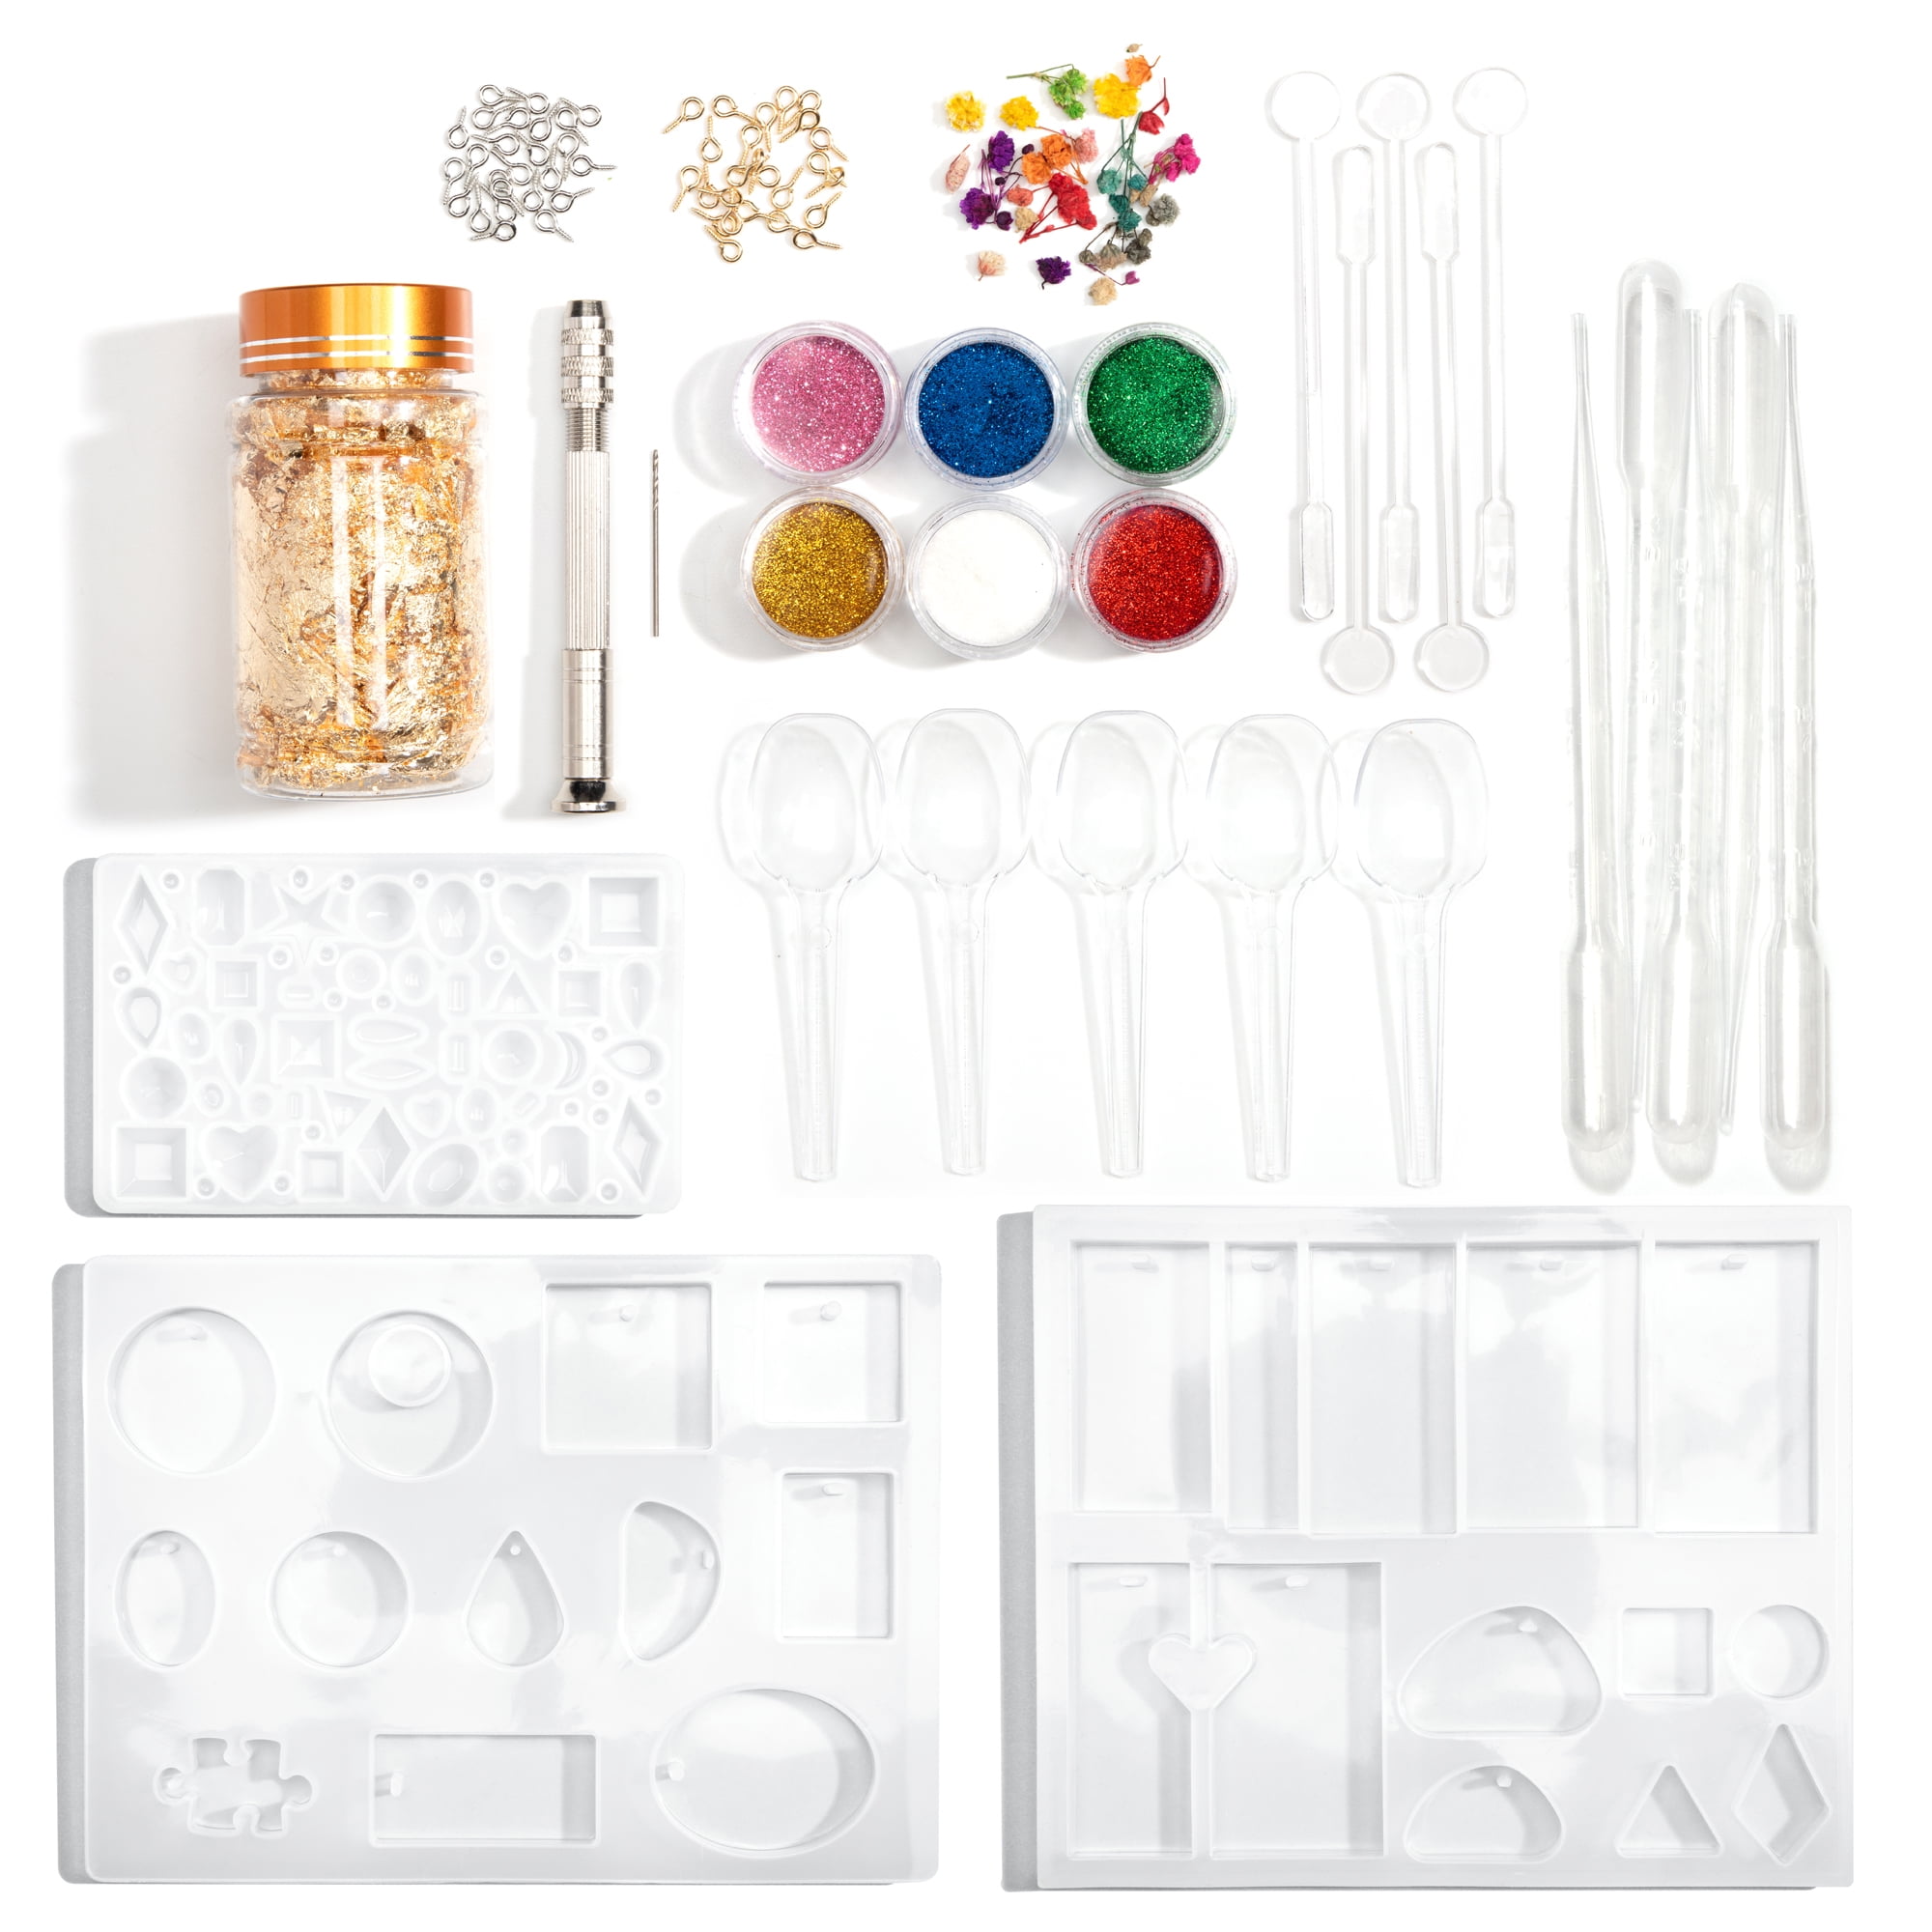 49pcs Resin Jewelry Making Supplies Kit Resin Decoration with Glitter DIY  Craft